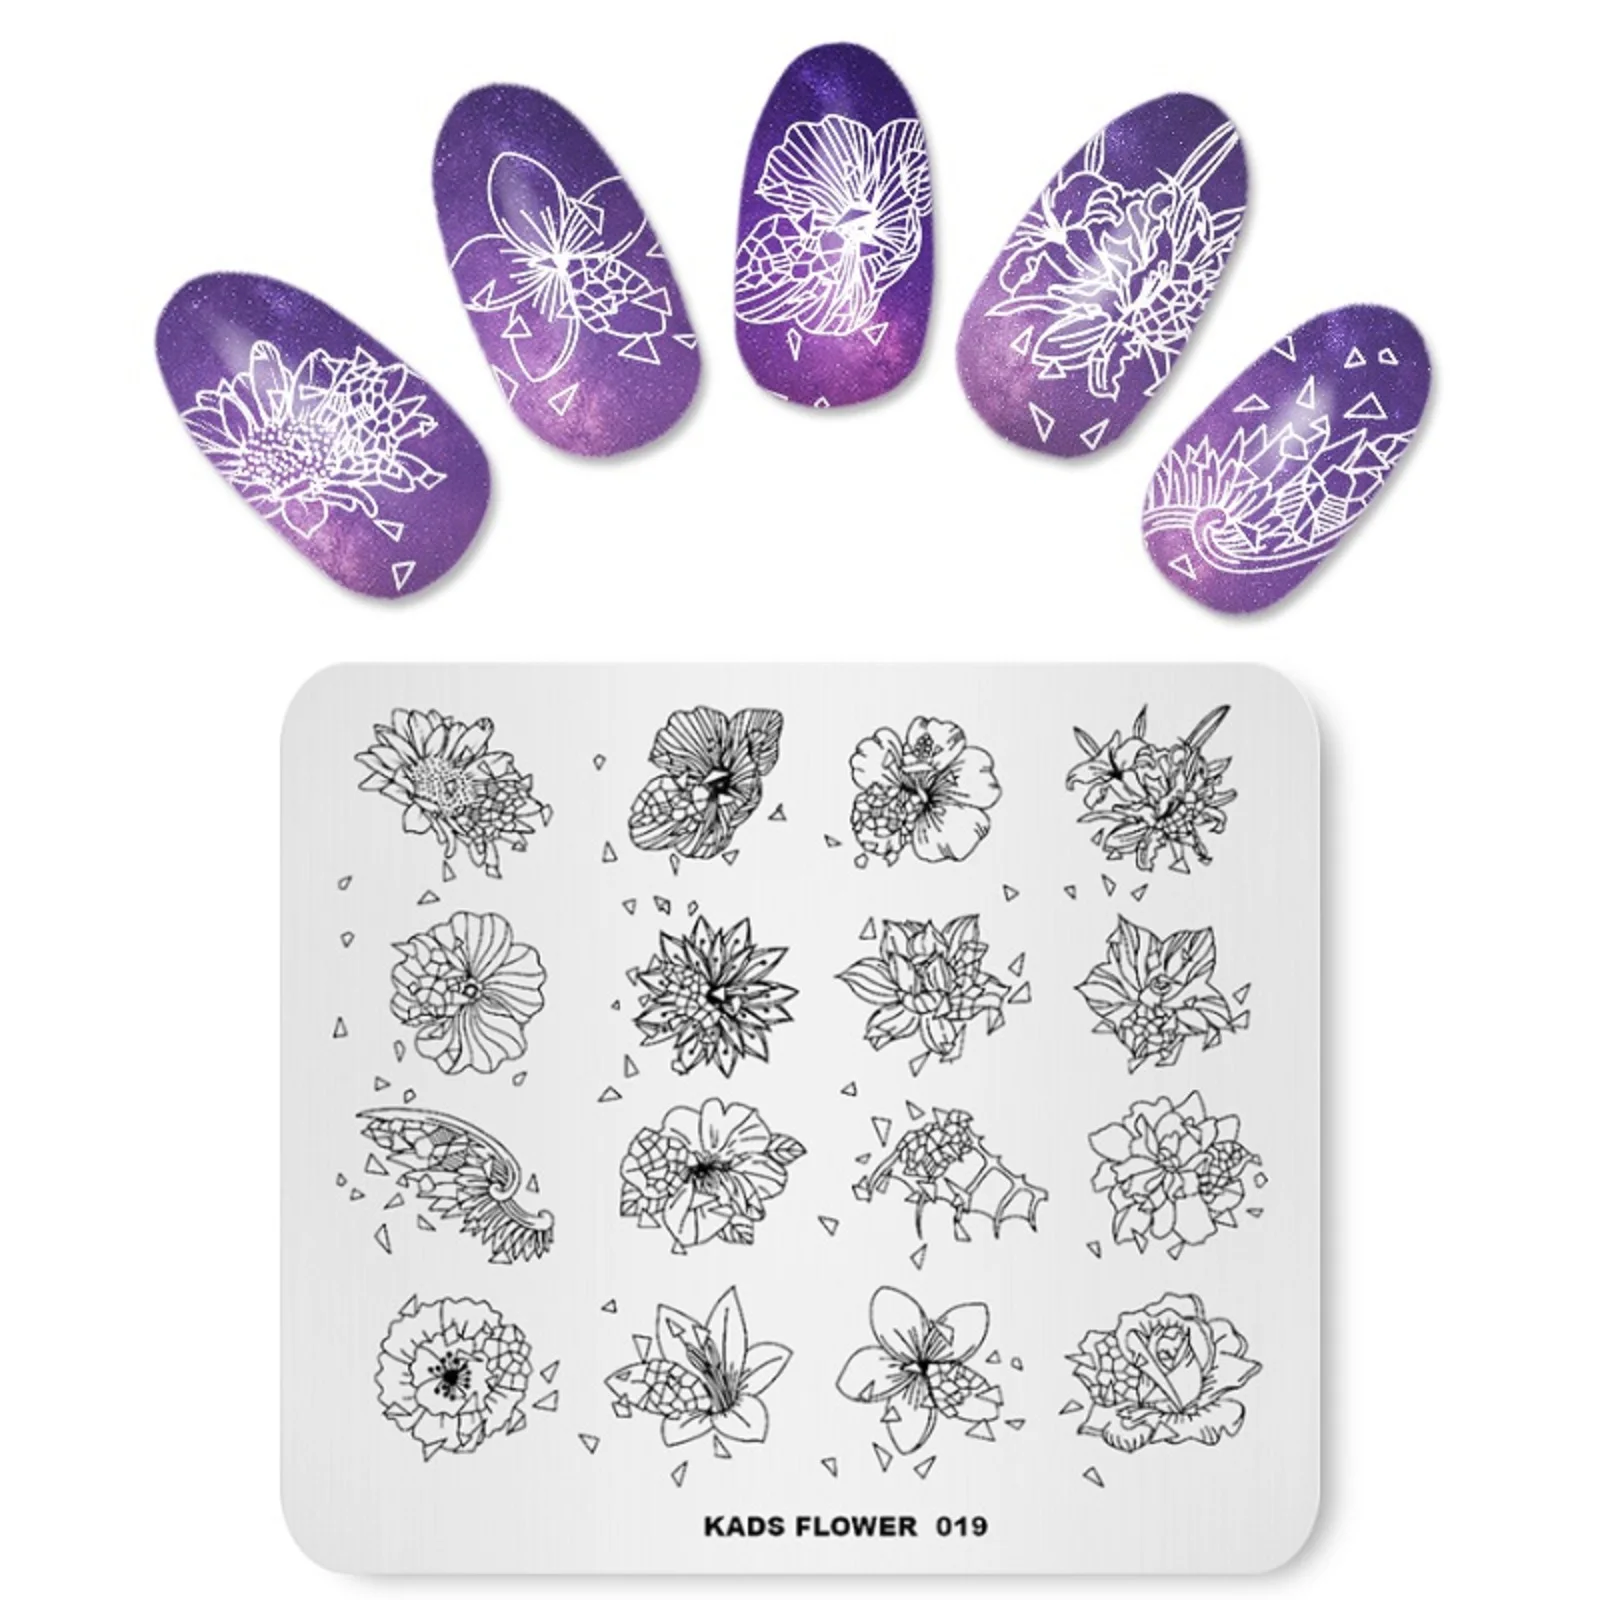 

KADS Nail Stamping Plates Flower 019 Full bloom Image Nail Art Stamp Template Stencil for Nails Manicure Tools Stamper